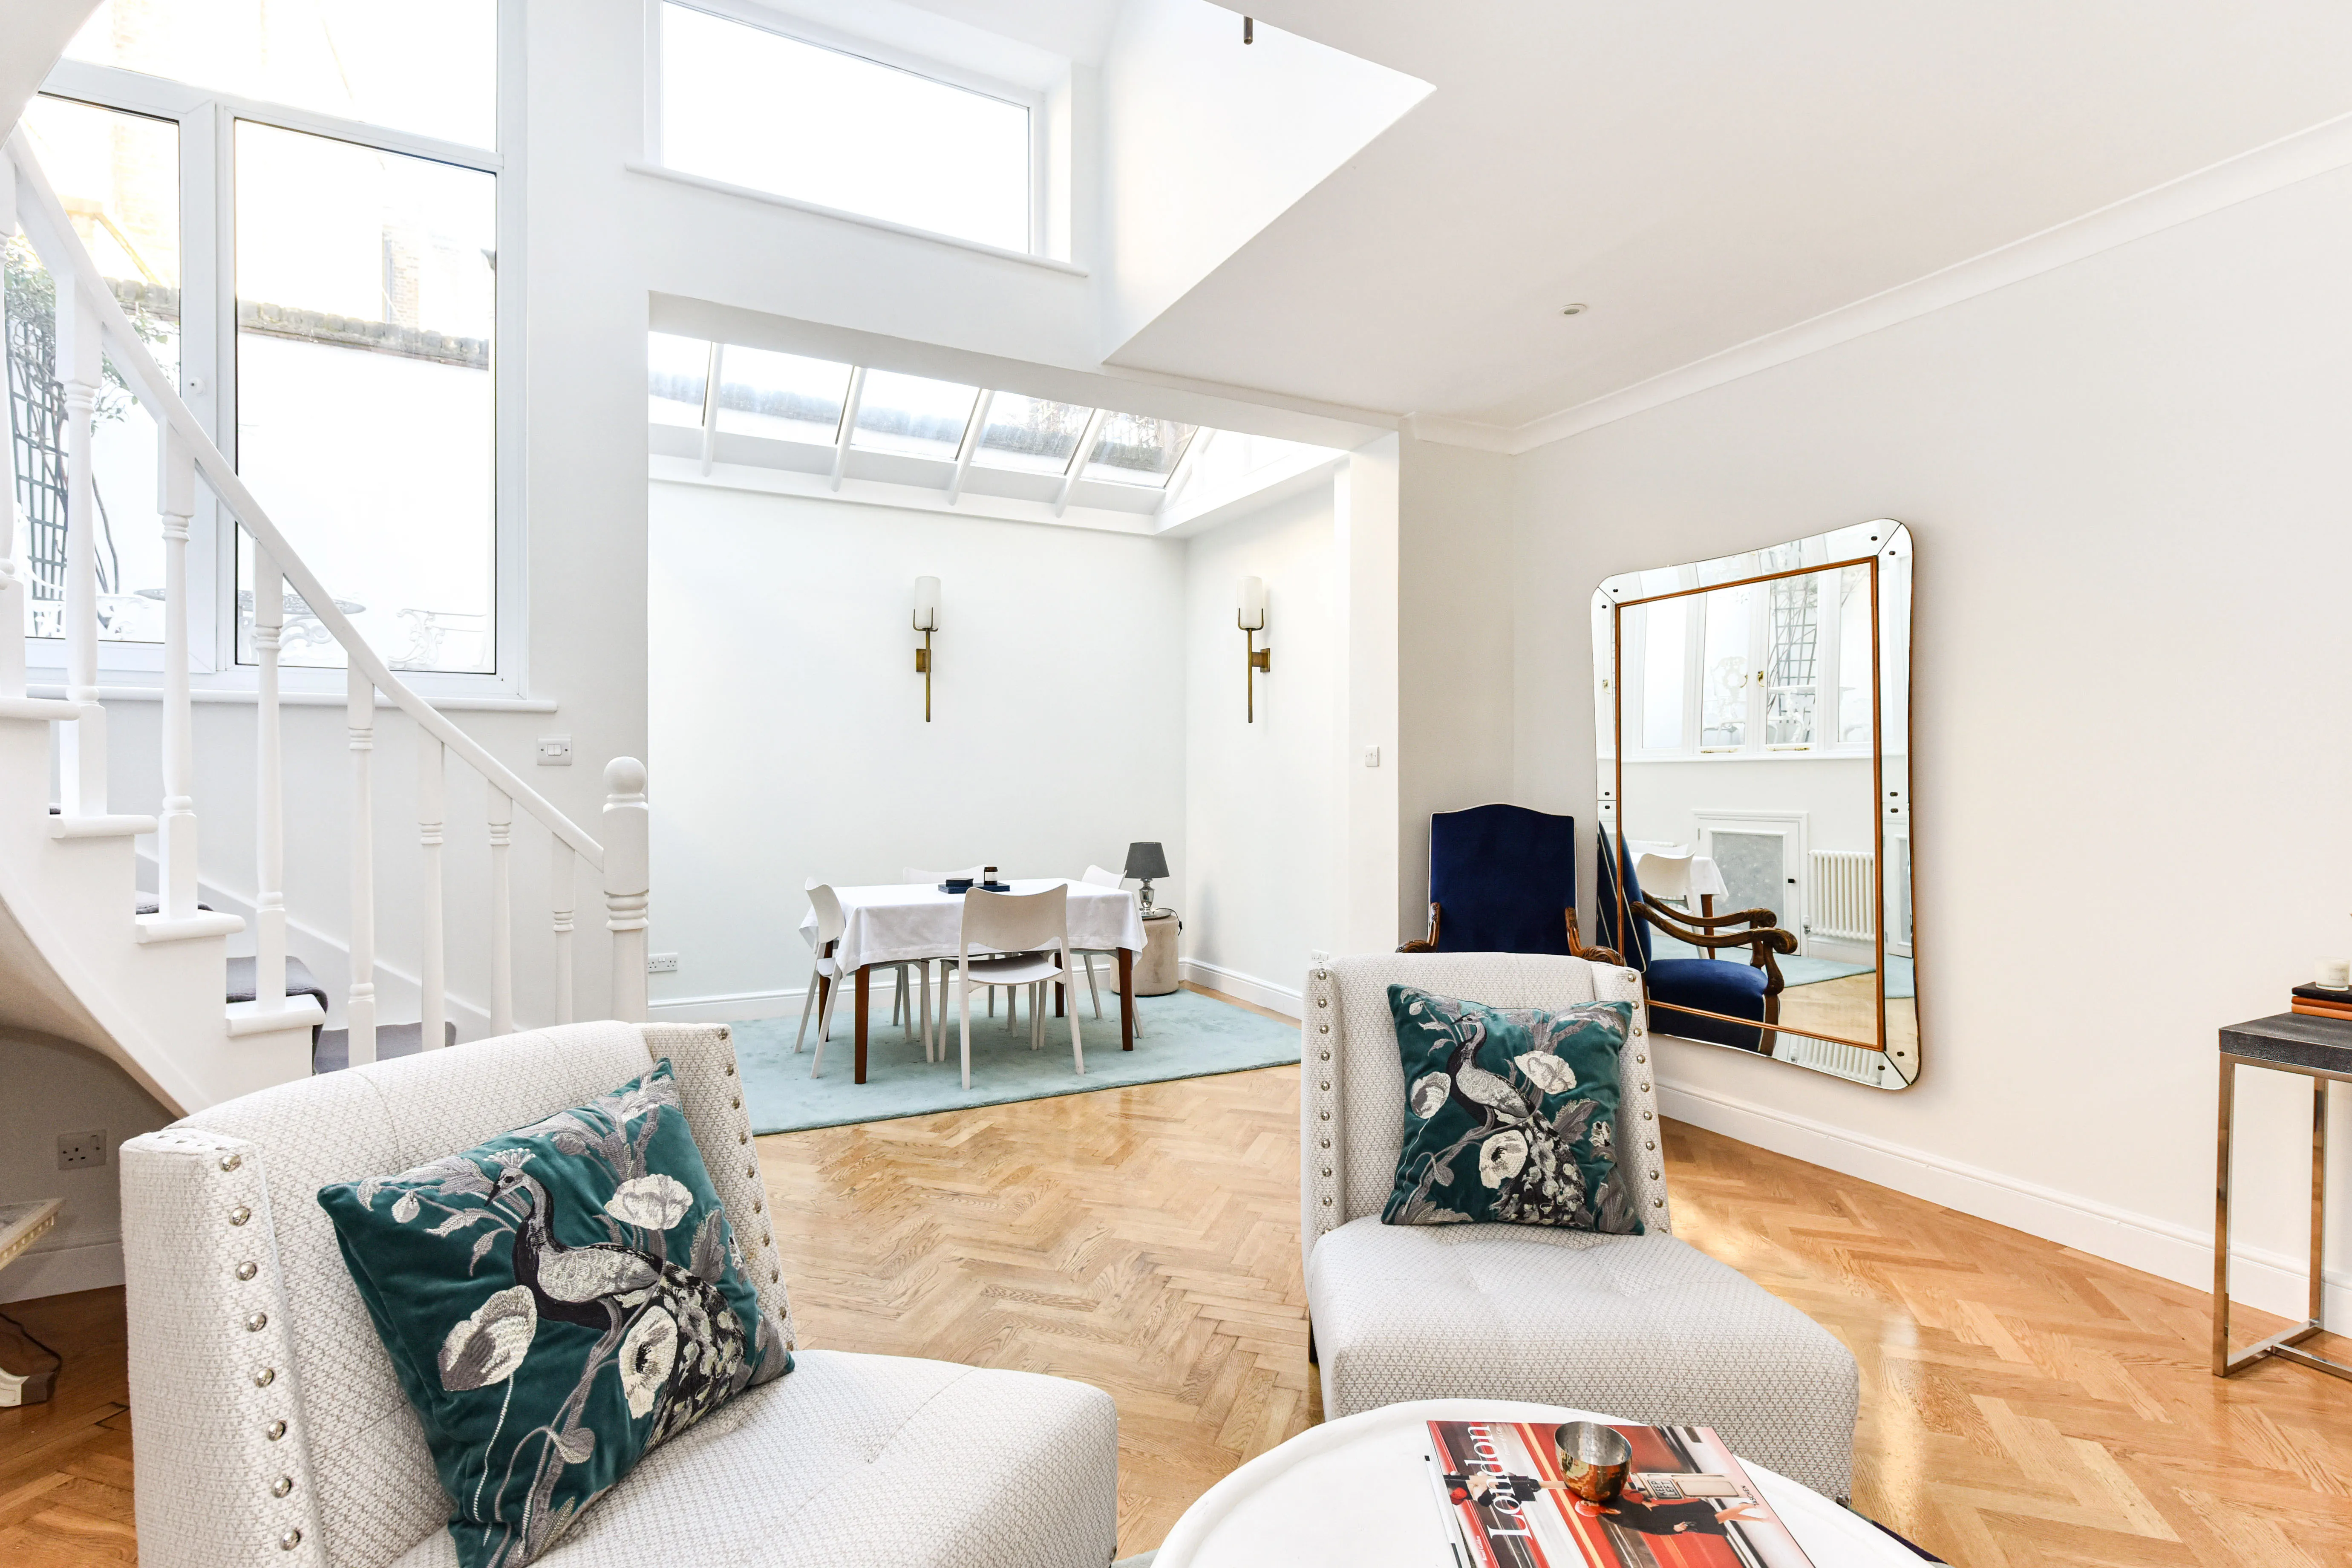 Stanford Road II, holiday home in Kensington, London